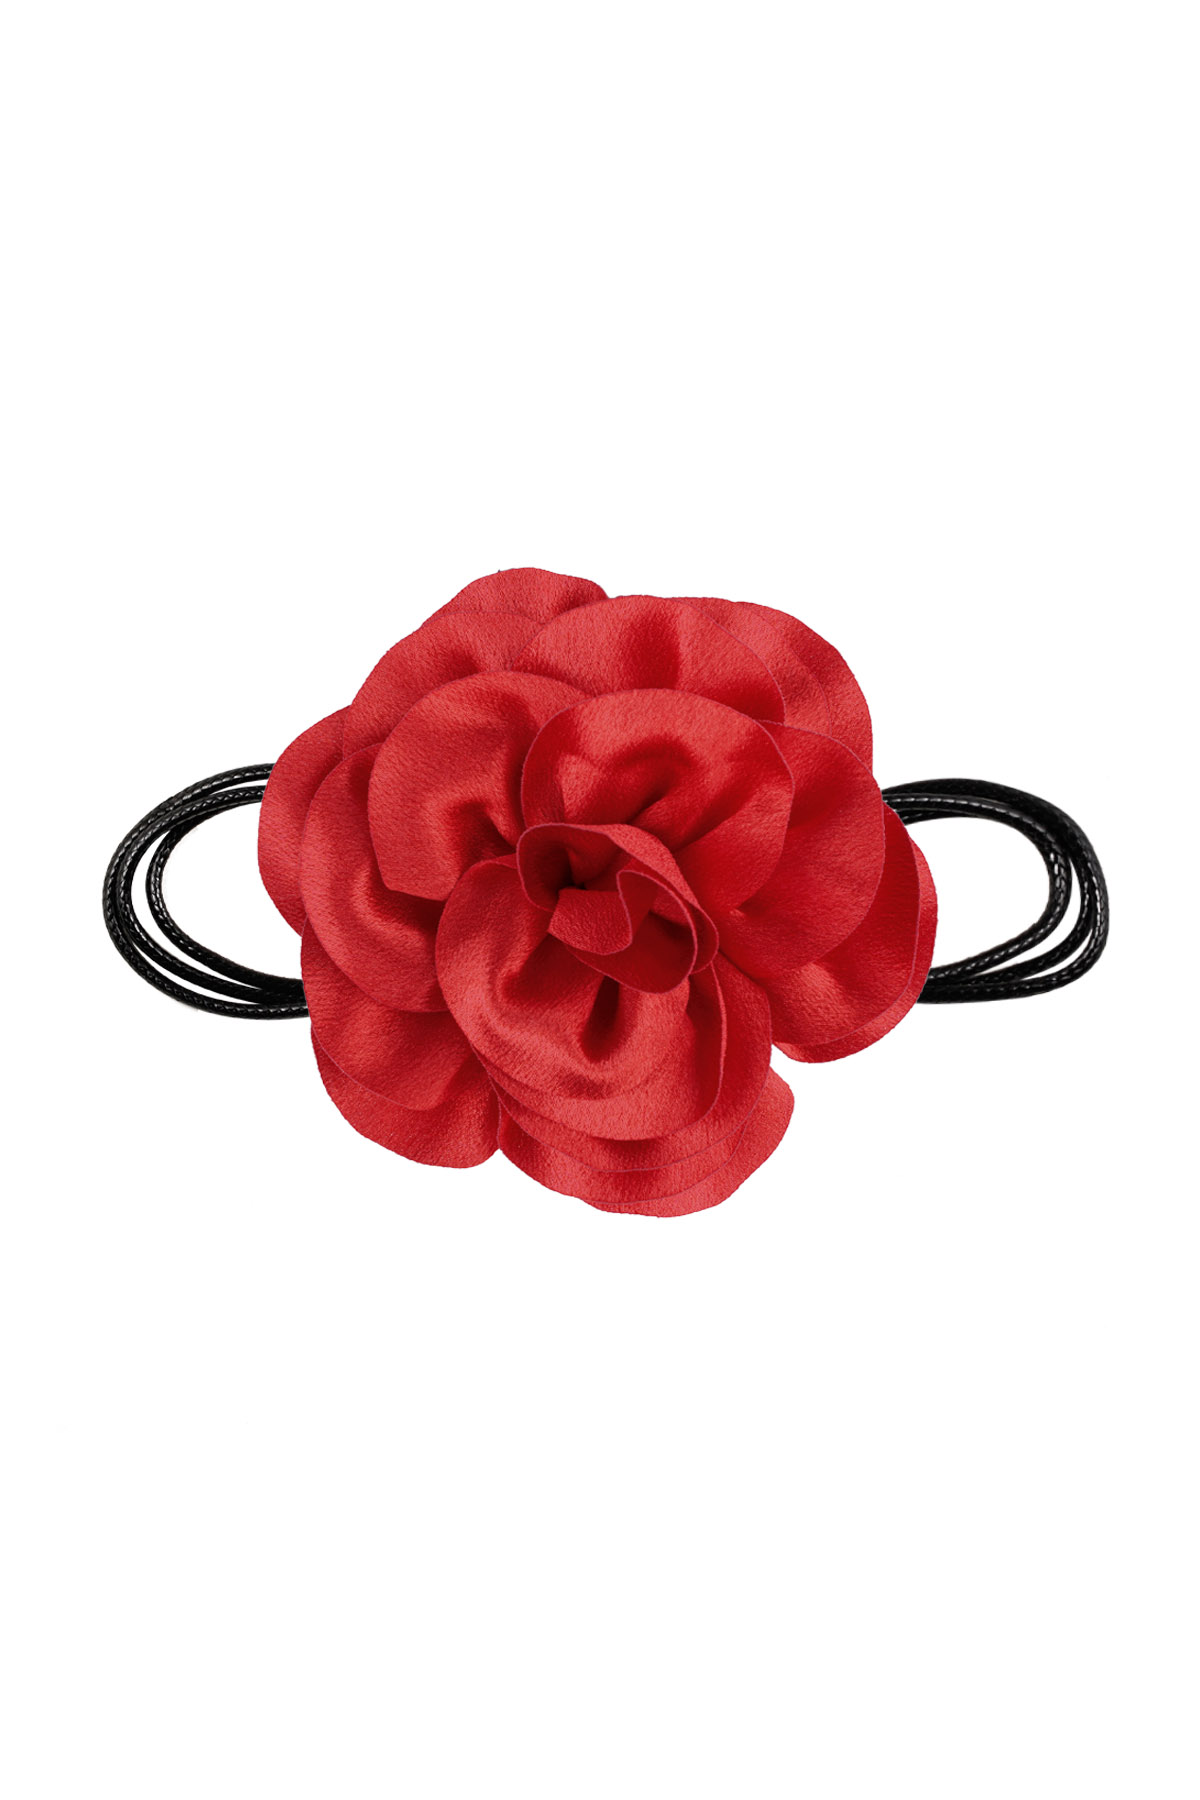 Necklace rope shiny flower - red h5 